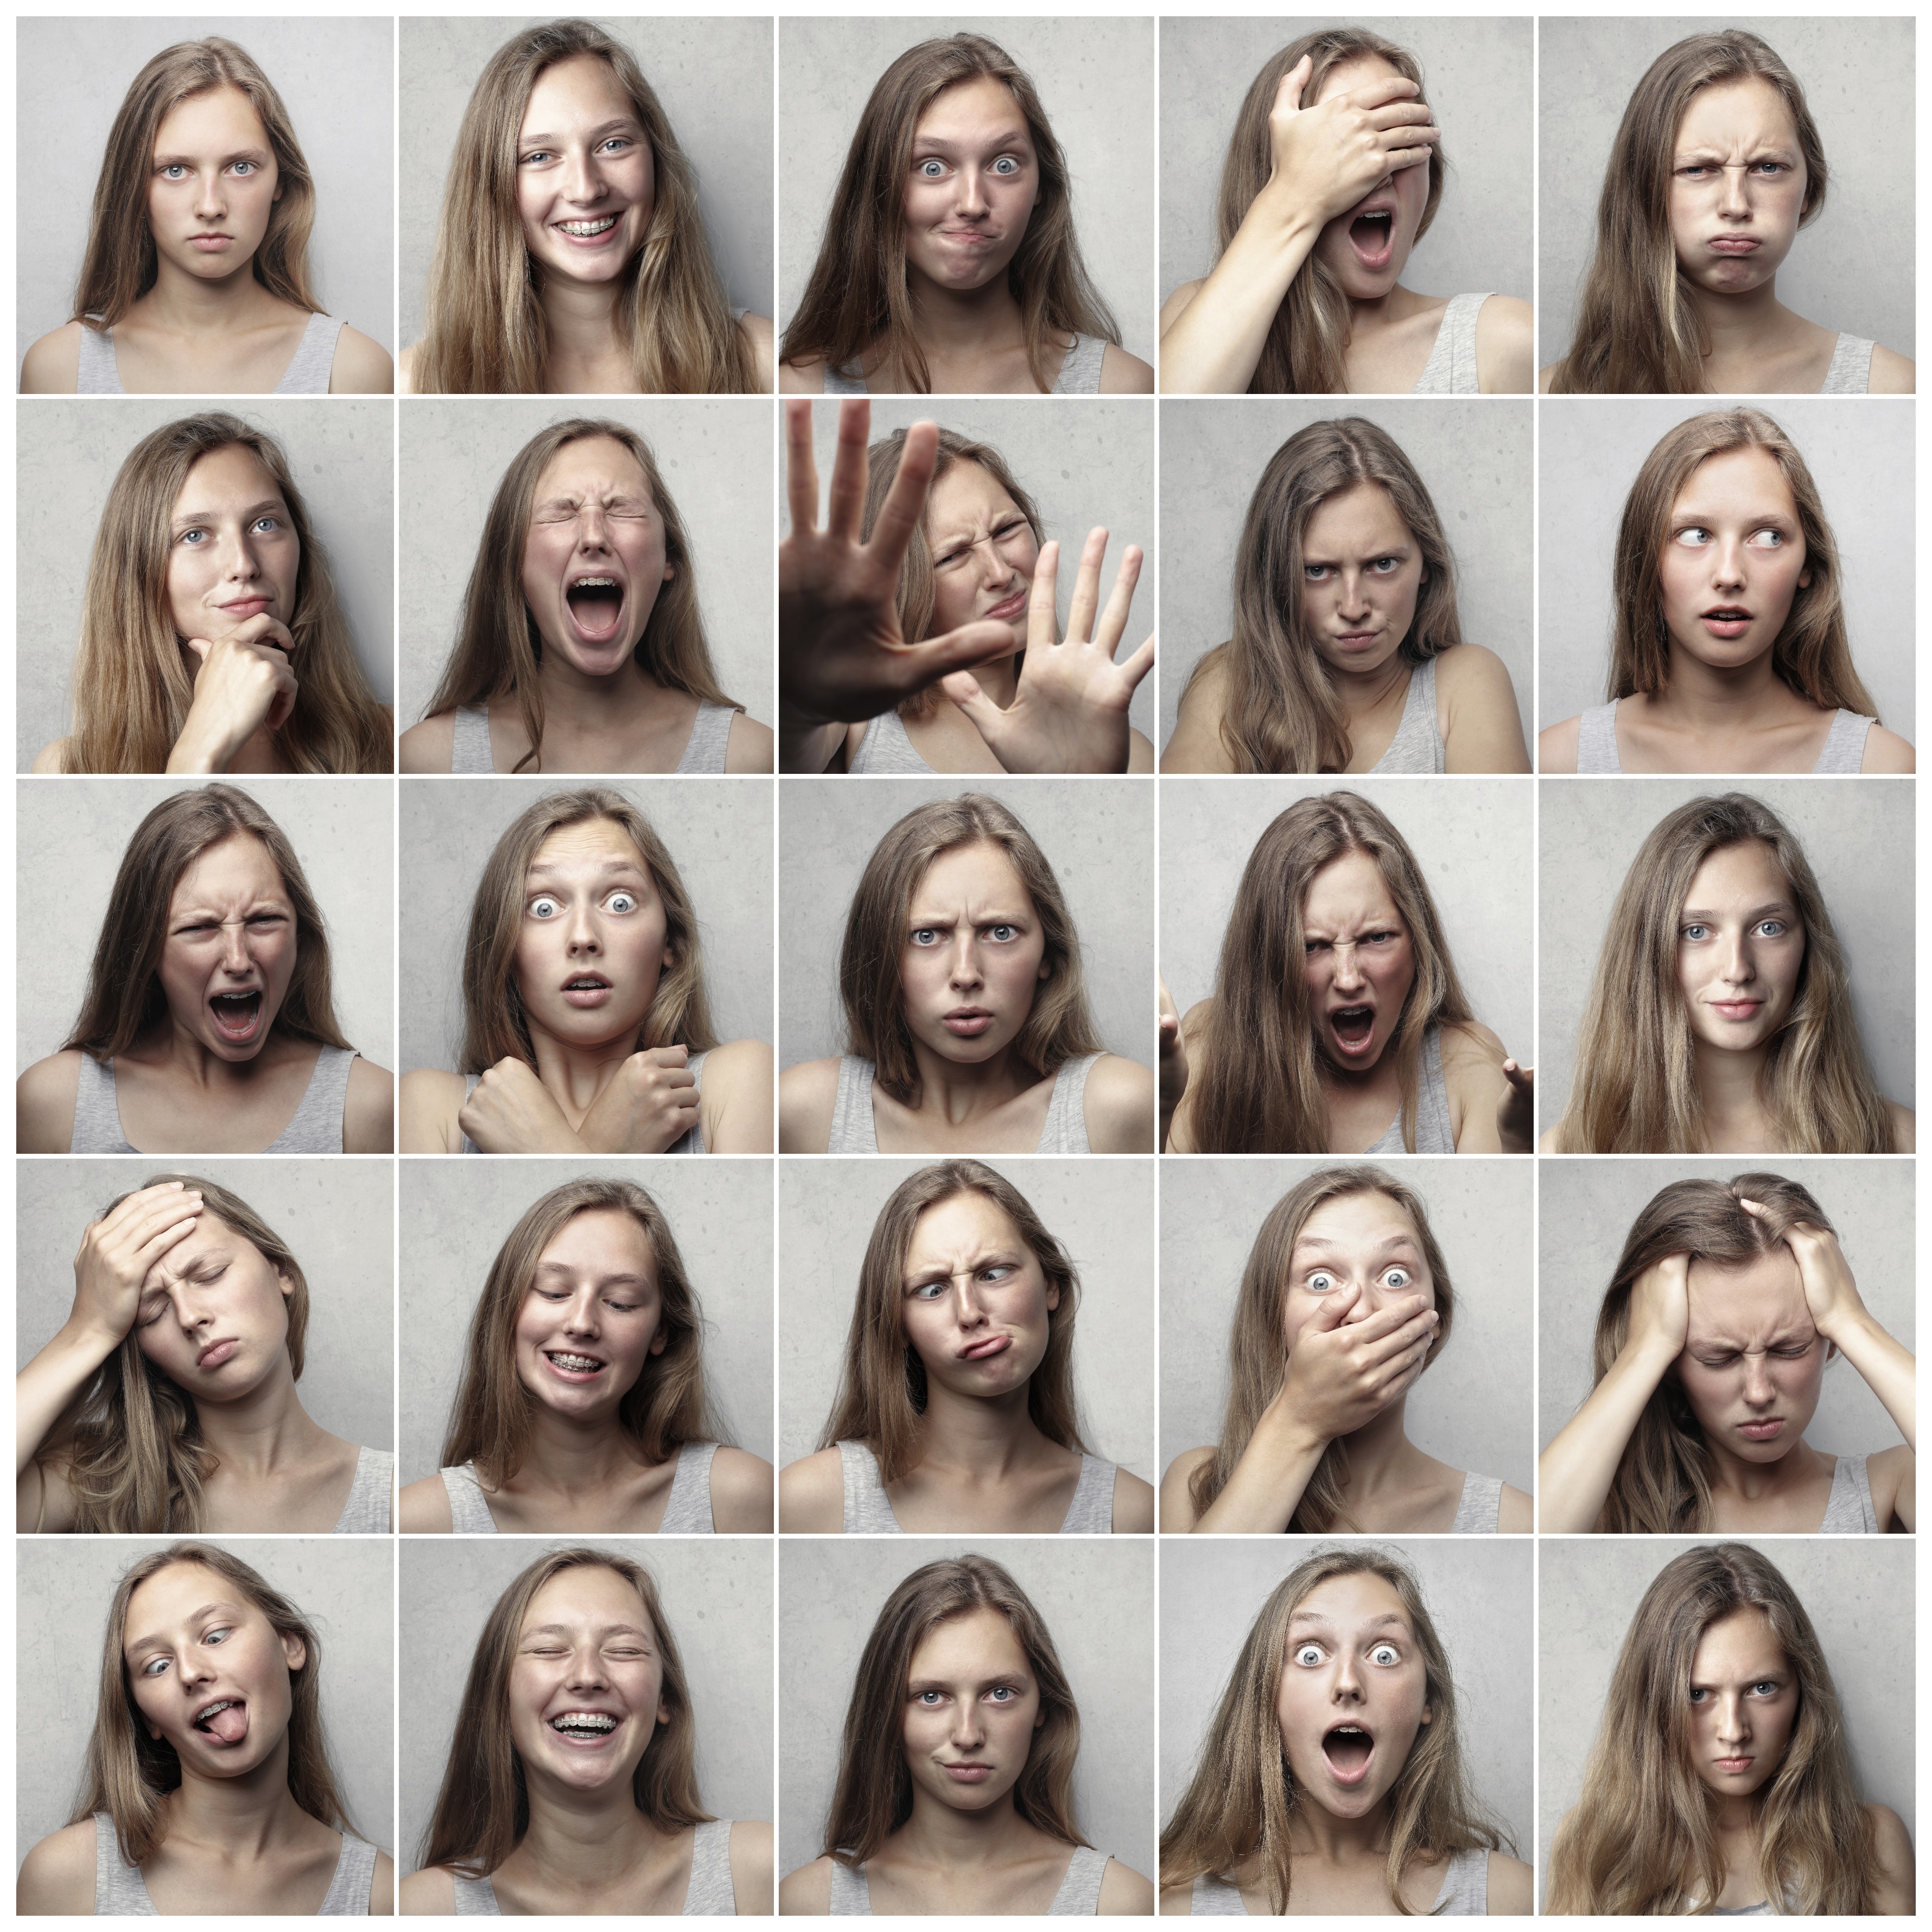 Stock image of different facial expressions